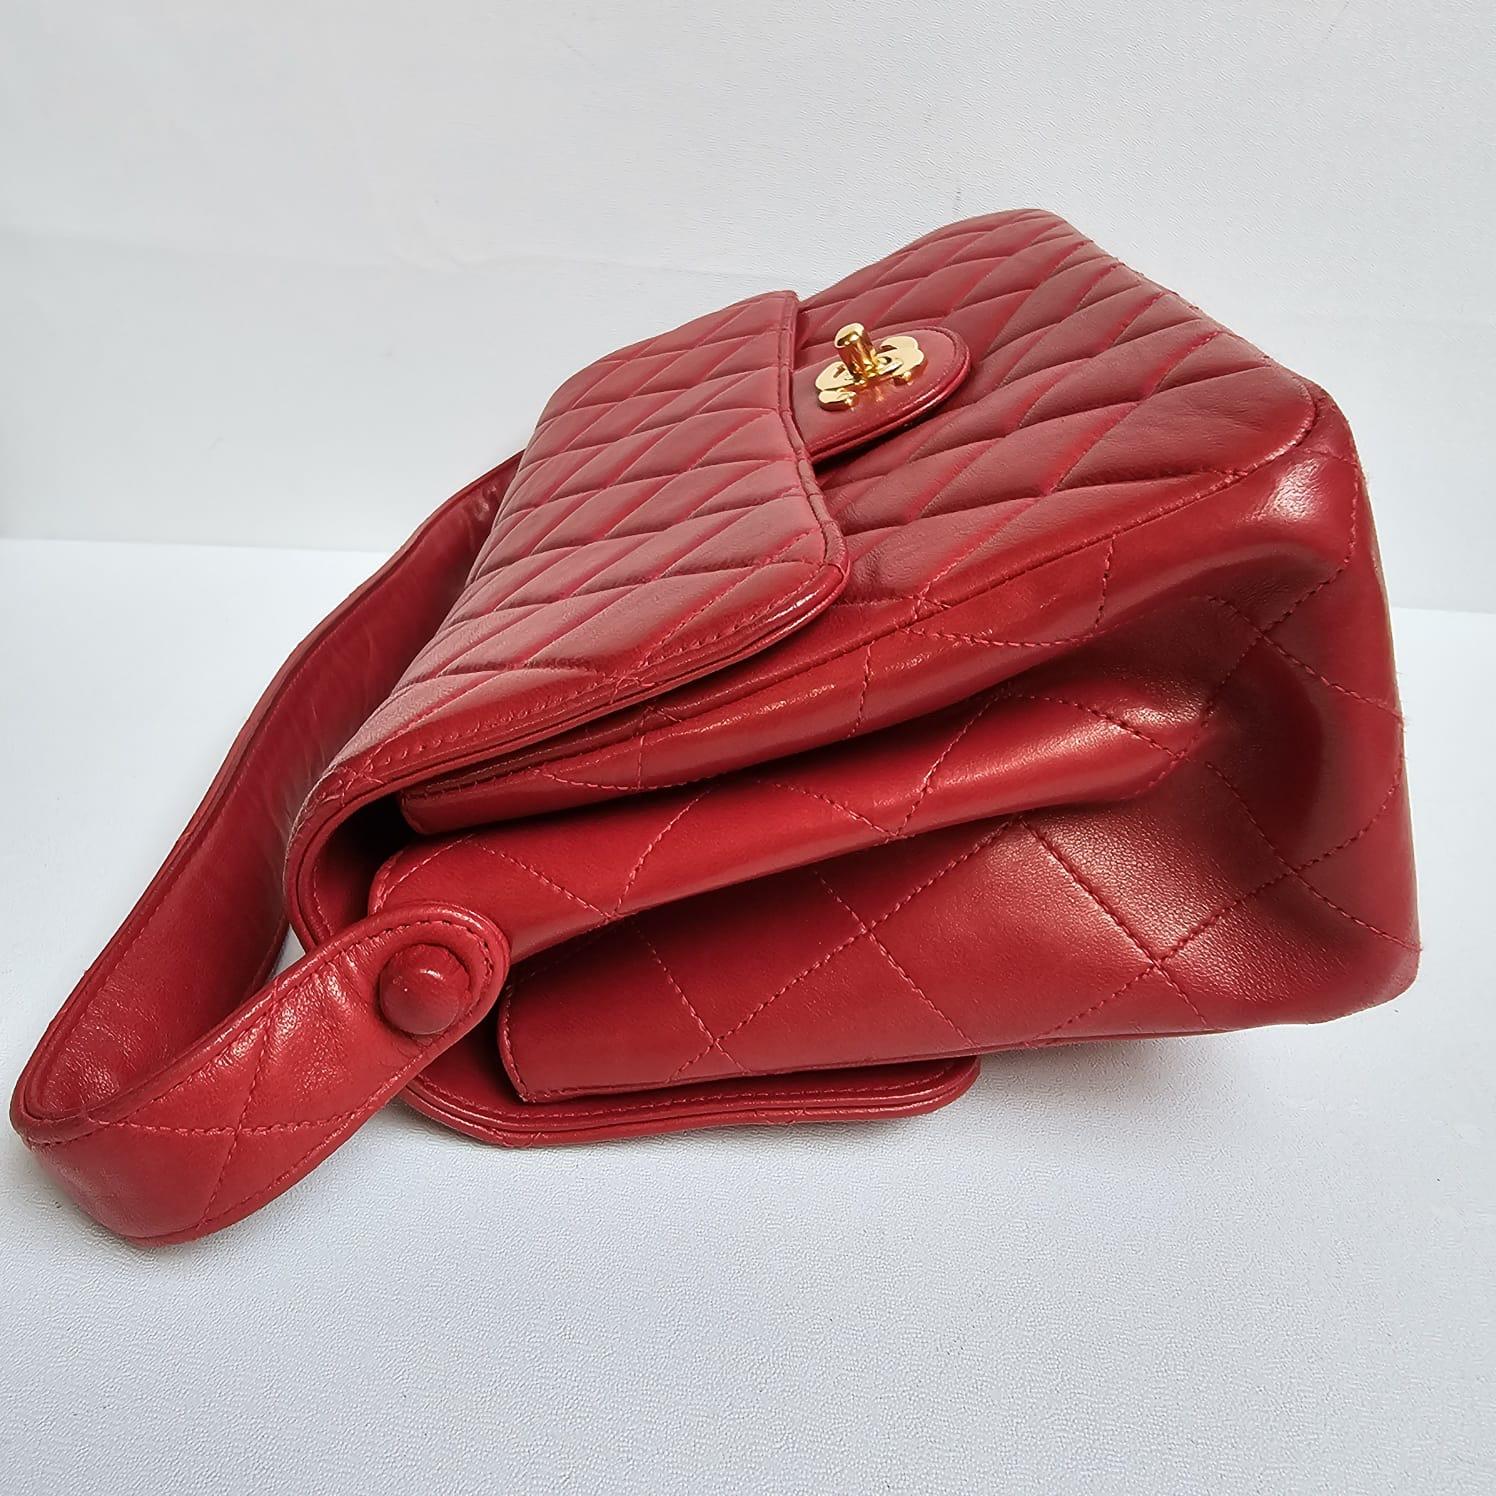 Chanel Vintage Red Lambskin Medium Quilted Double Face Top Handle Bag For Sale 8